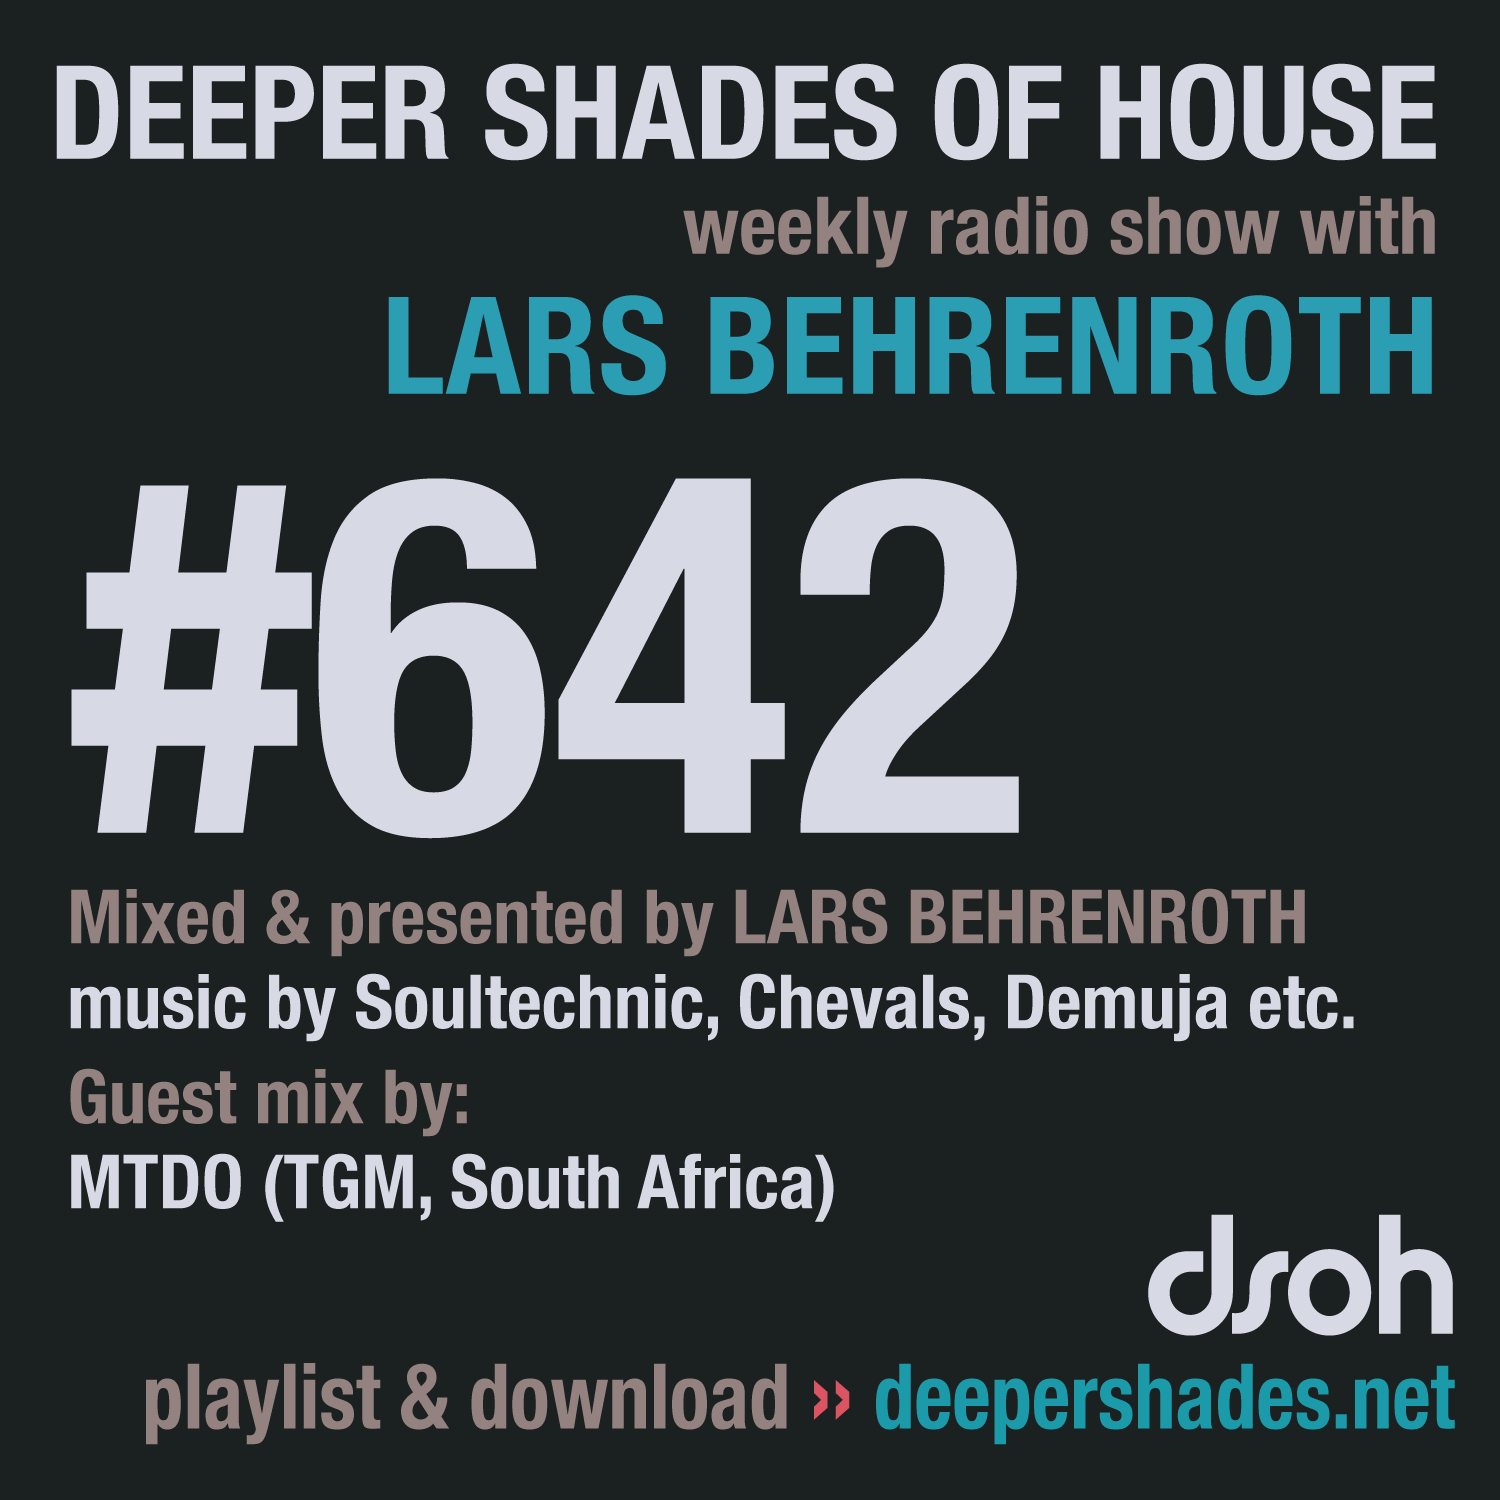 Deeper Shades Of House 642